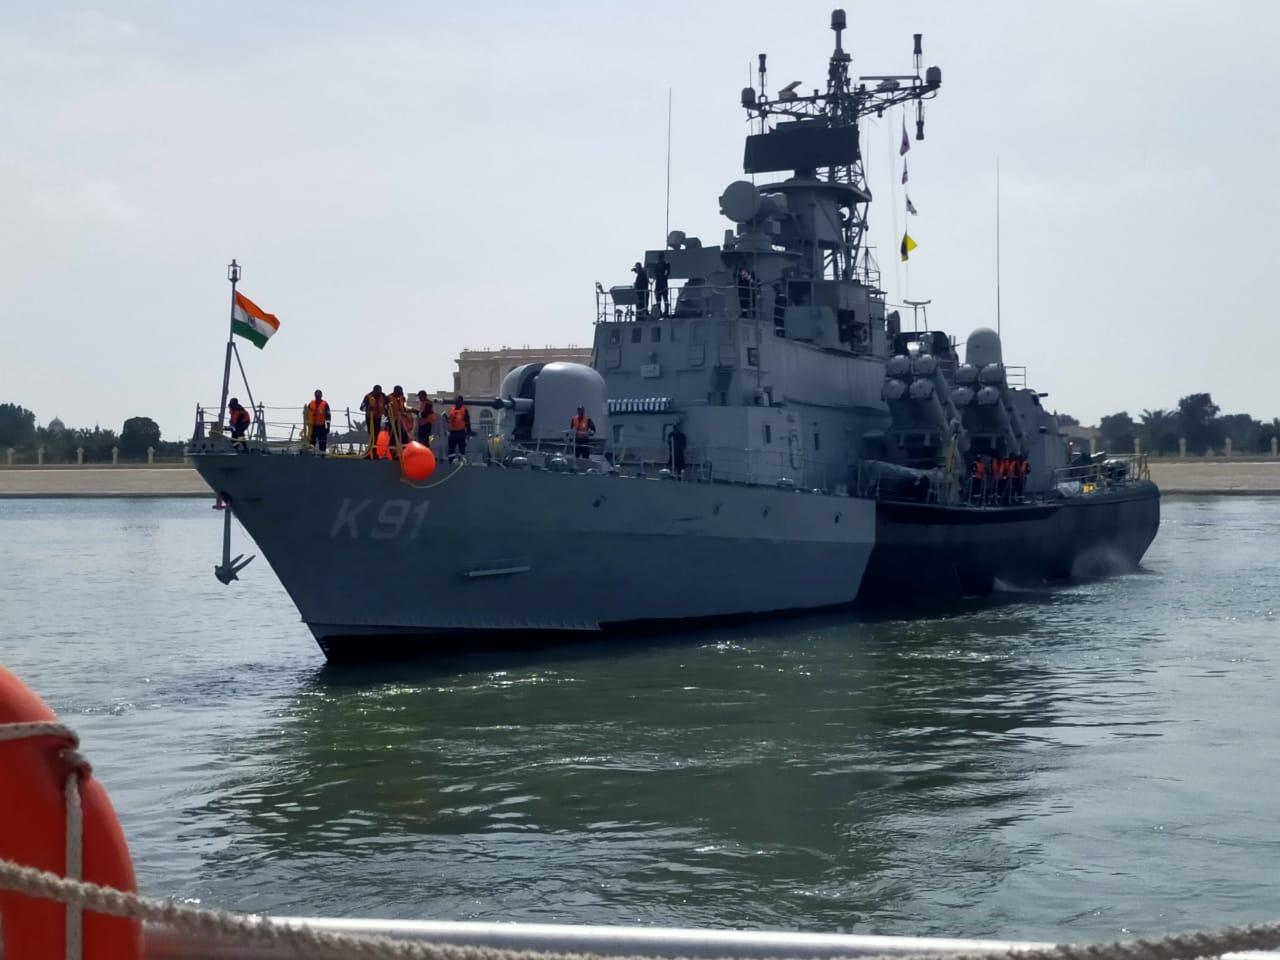 In a manifestation of growing defence relations between the UAE and India, an Indian Navy missile boat, INS Pralaya is participating at the ongoing show.